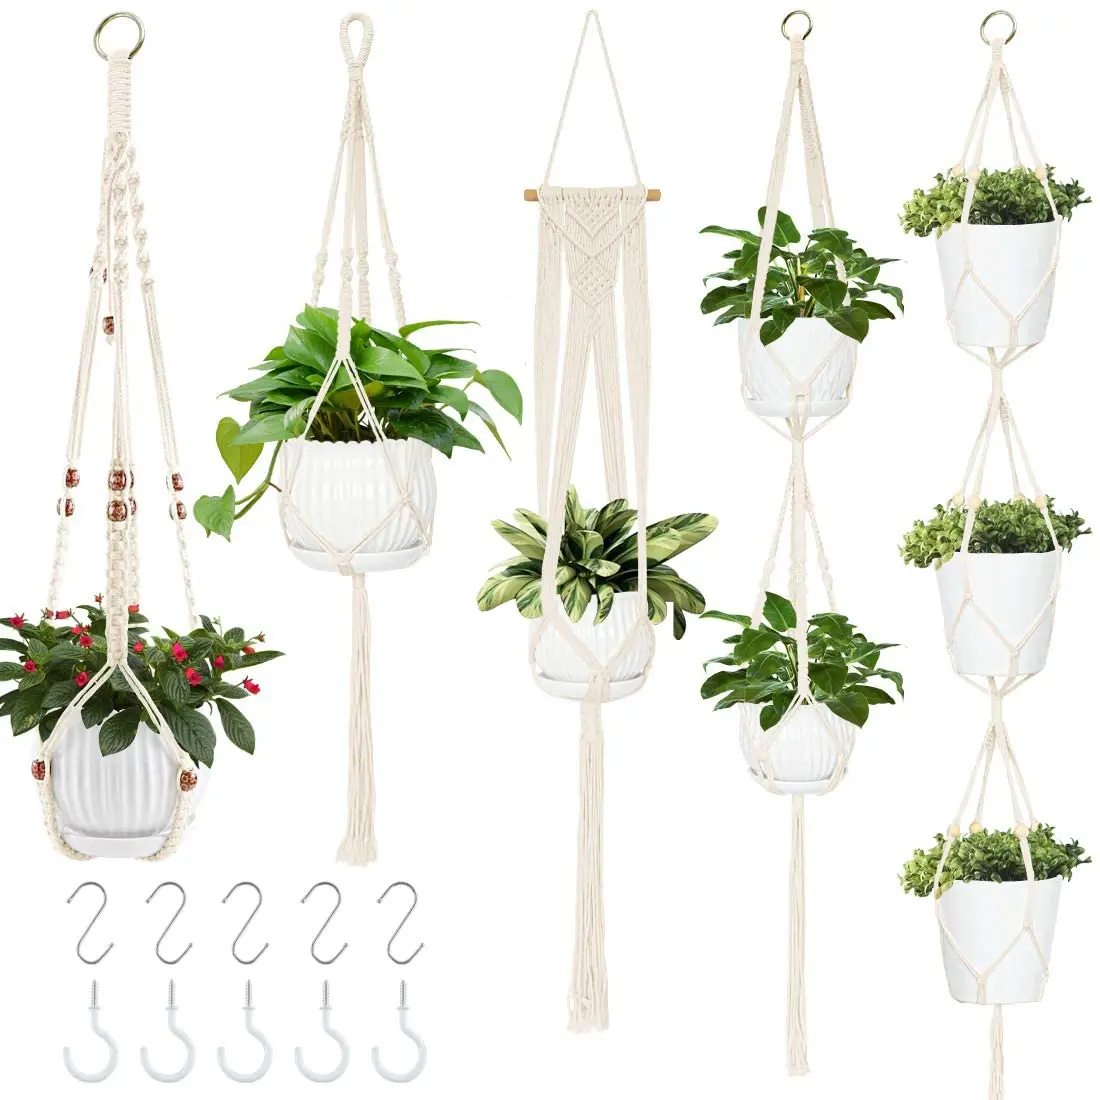 5 Pack Macrame Plant Hangers with 10 Hooks, Different Tiers, Wall Hanging Planter Basket Flower Pots Holder for Indoor Outdoor H